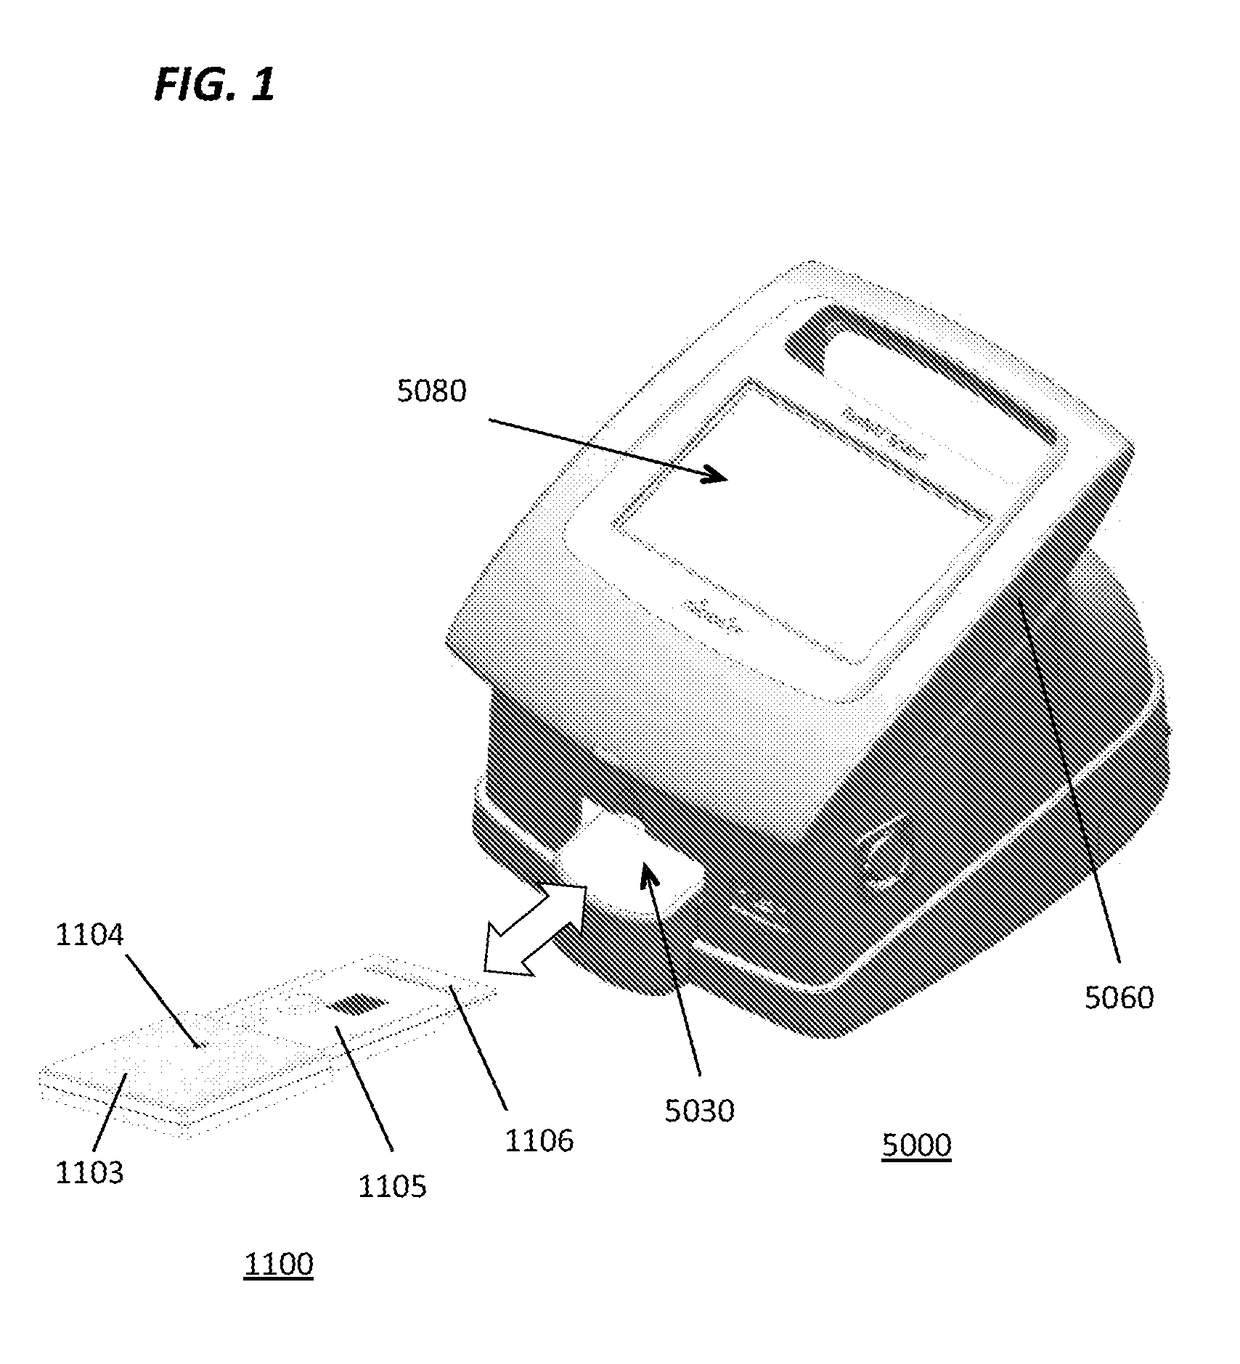 Microfluidic cartridges and apparatus with integrated assay controls for analysis of nucleic acids